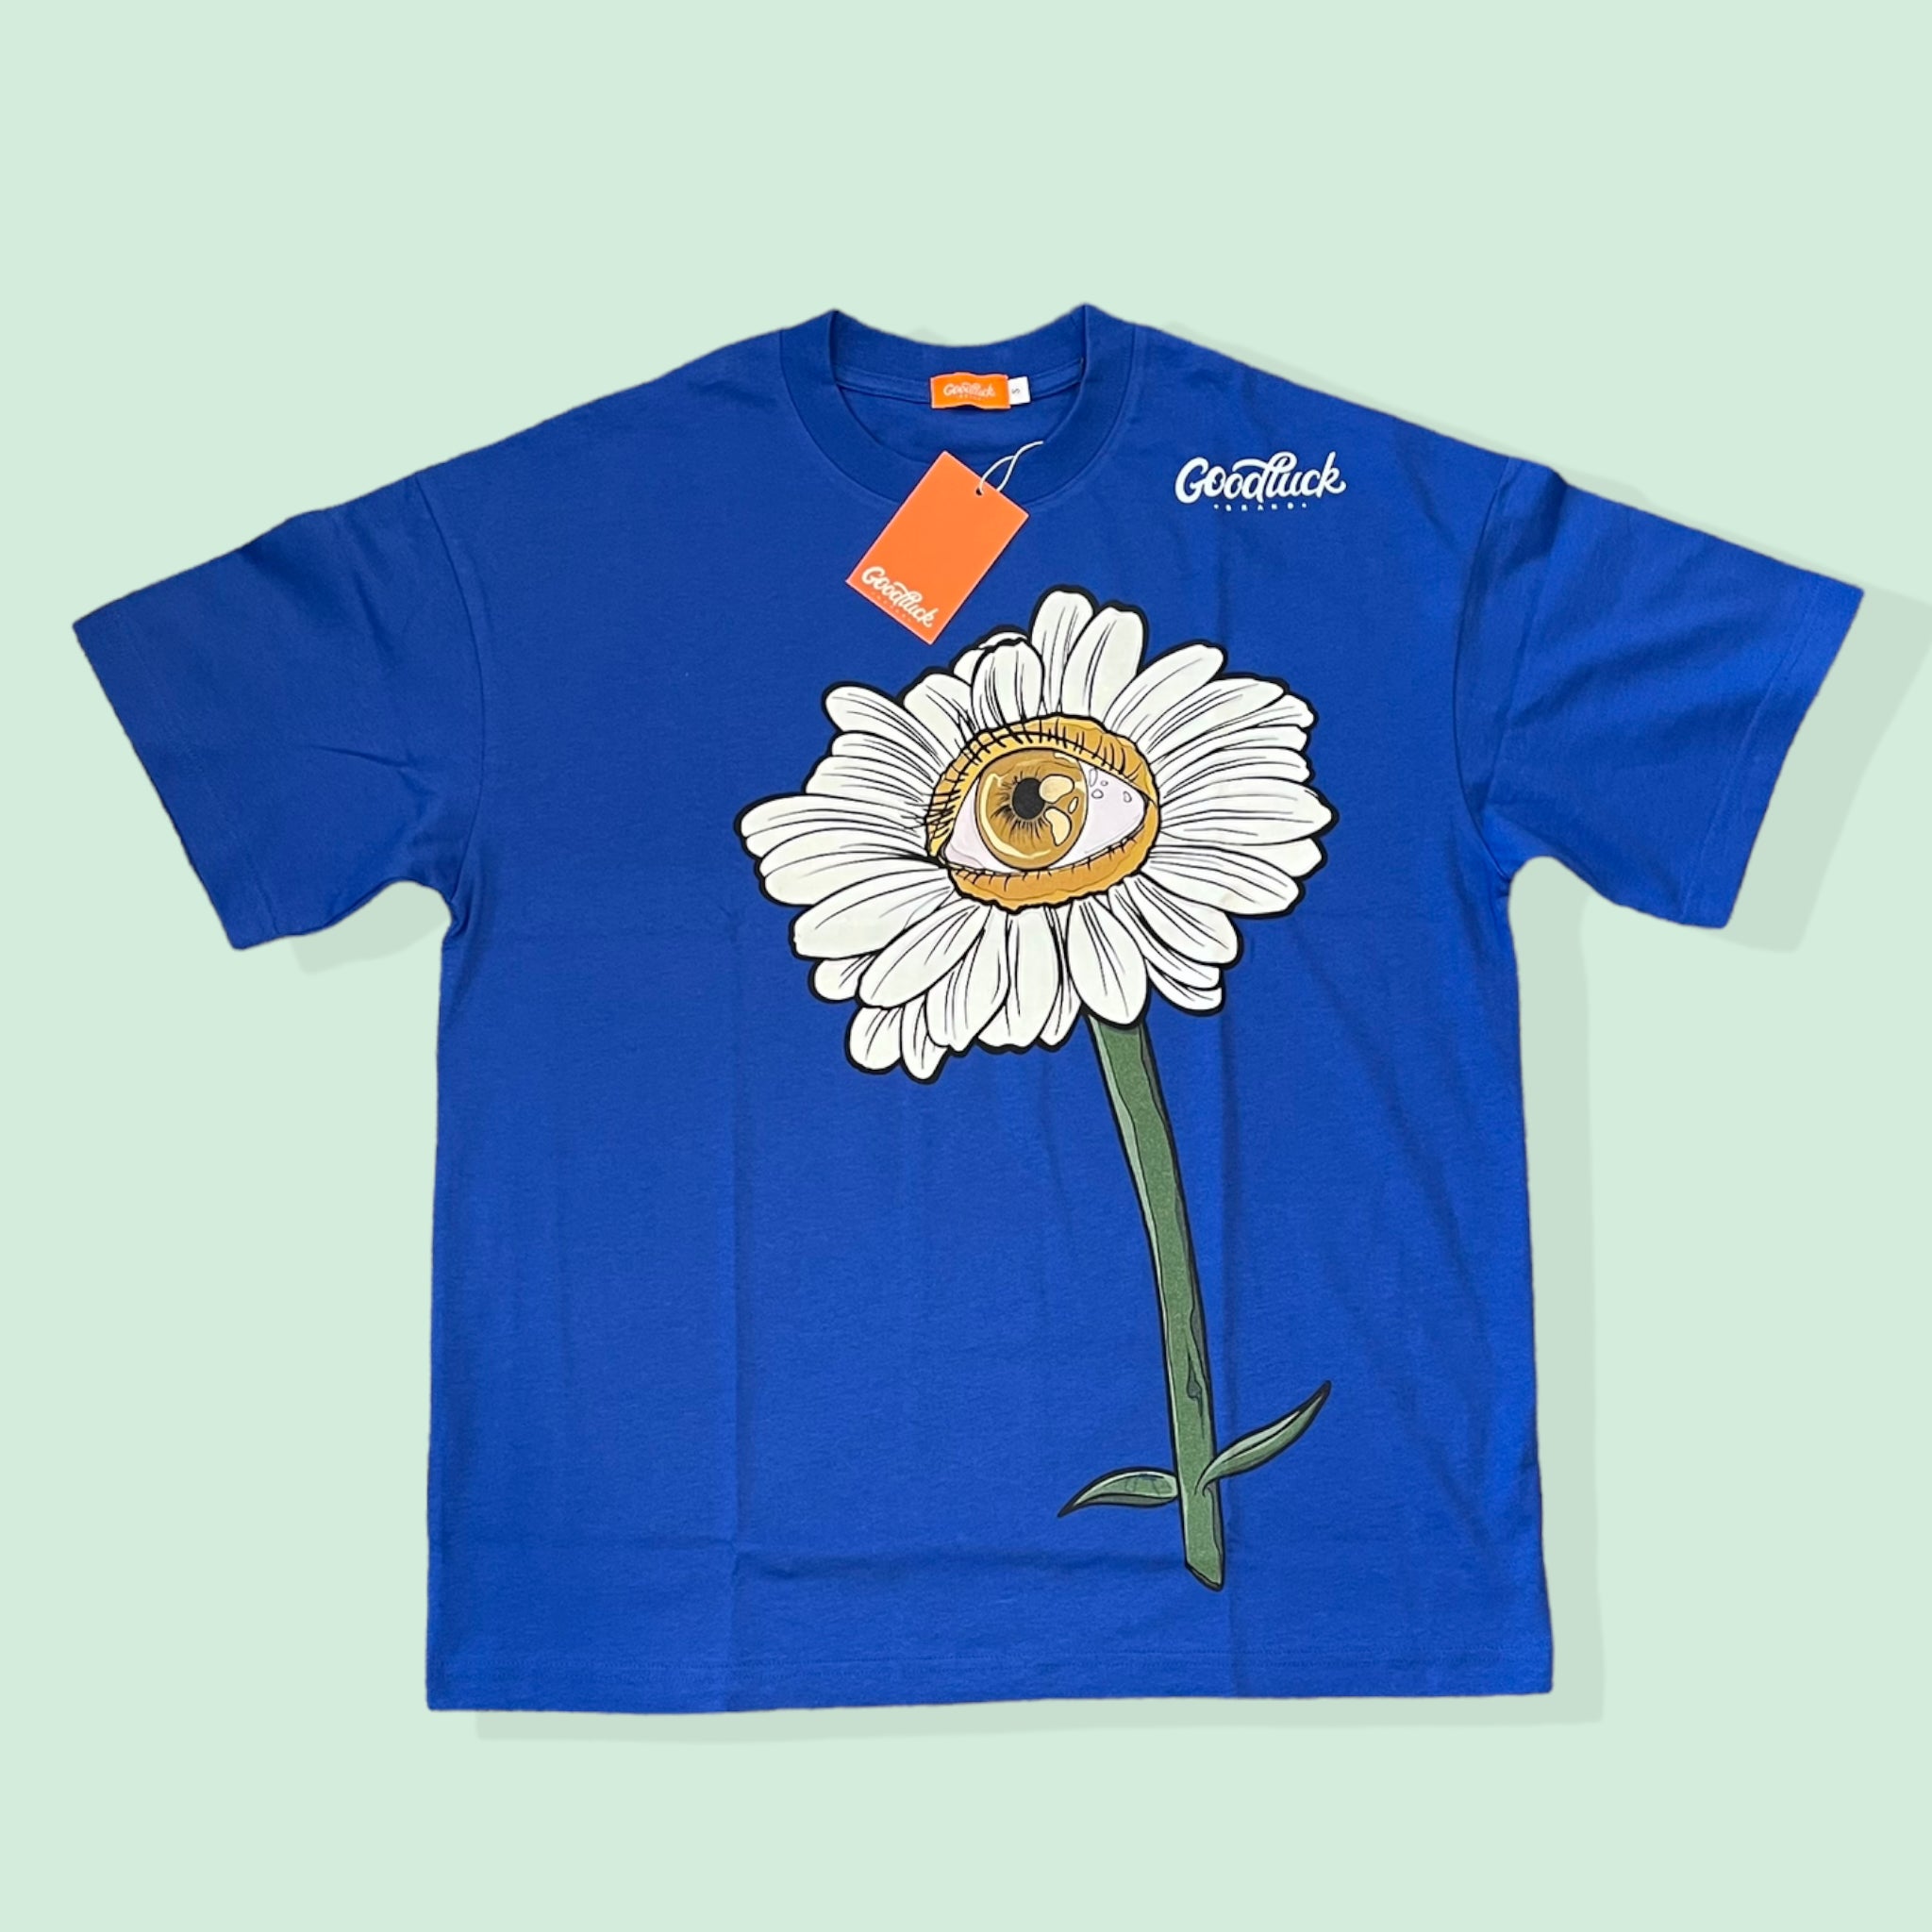 Royal Blue “See My Flowers” T Shirt